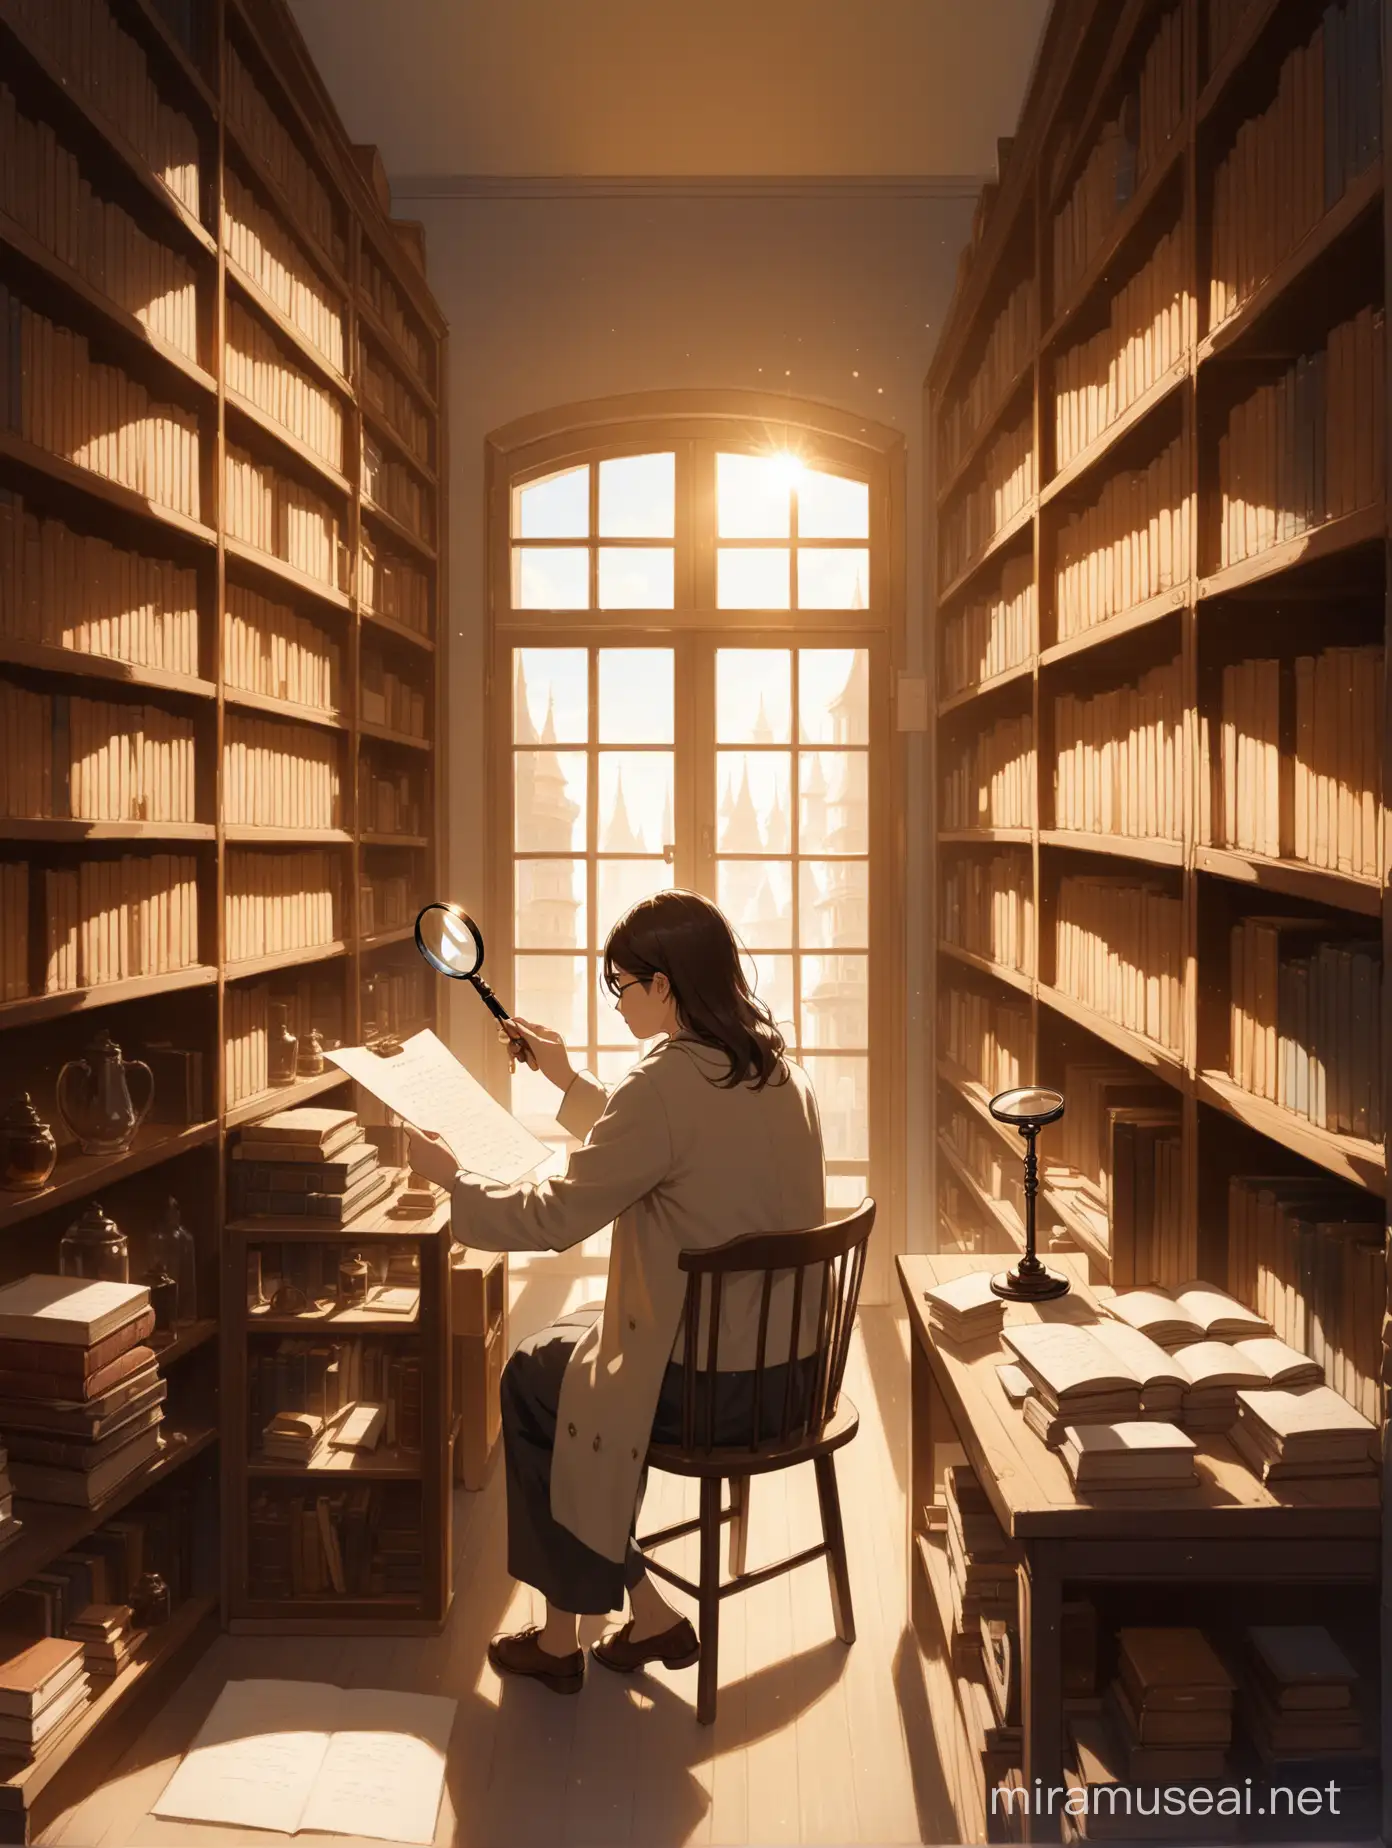 a person holding a magnifying glass, examining a piece of artwork or a handwritten note, sitting in a cozy, sunlit room surrounded by shelves filled with books, artifacts, and various objects. 